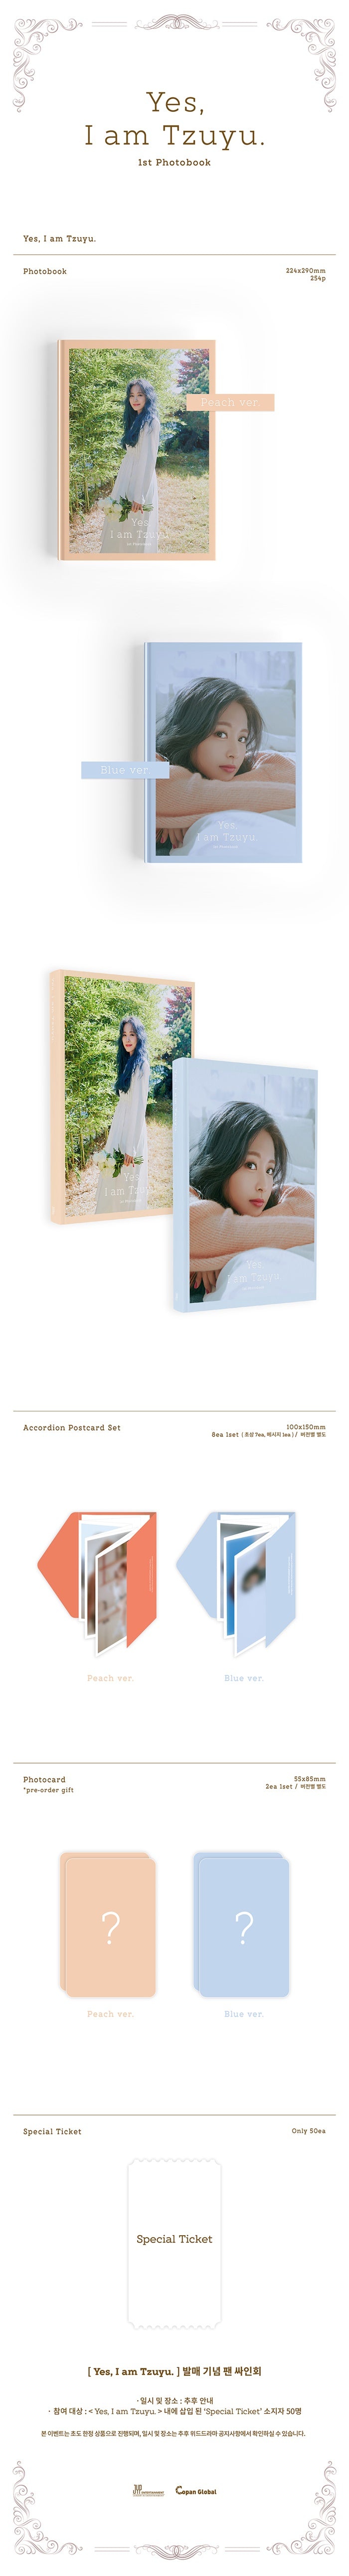 1 Photo Book (254 pages)
1 Accordion Postcard Set (8 cards)
2 Photo Cards